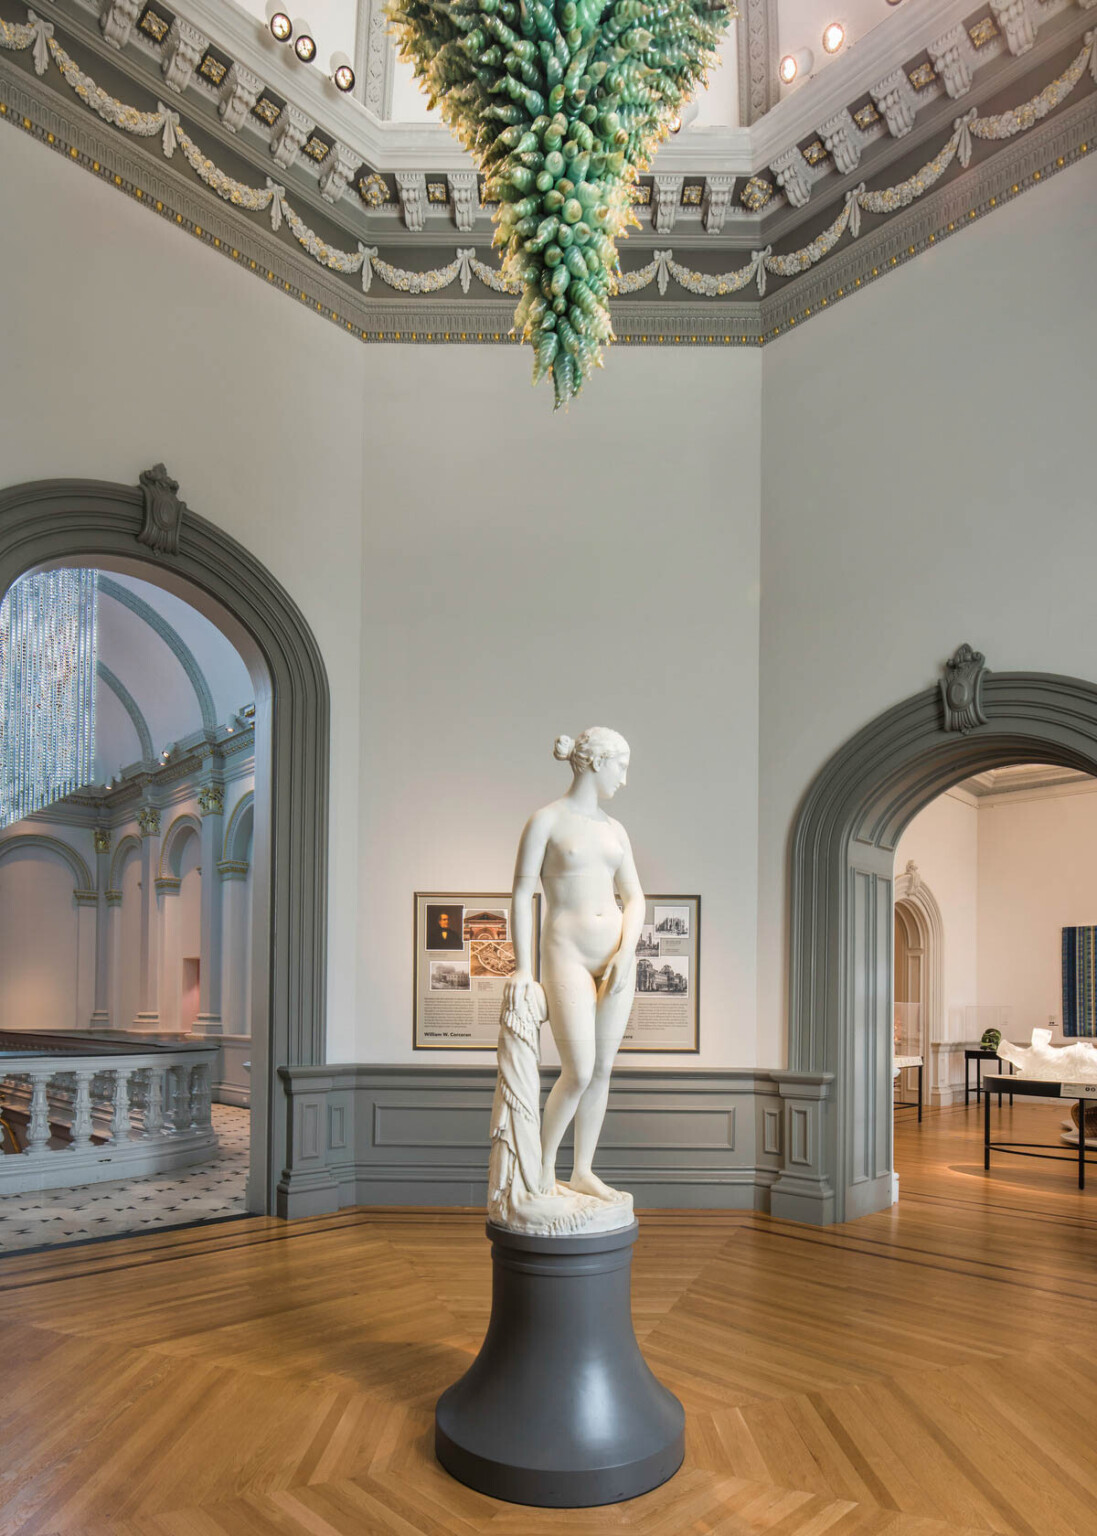 Sculpture of a woman stands on a podium in the center of rotunda with arching molded grey doors. Crown molding above